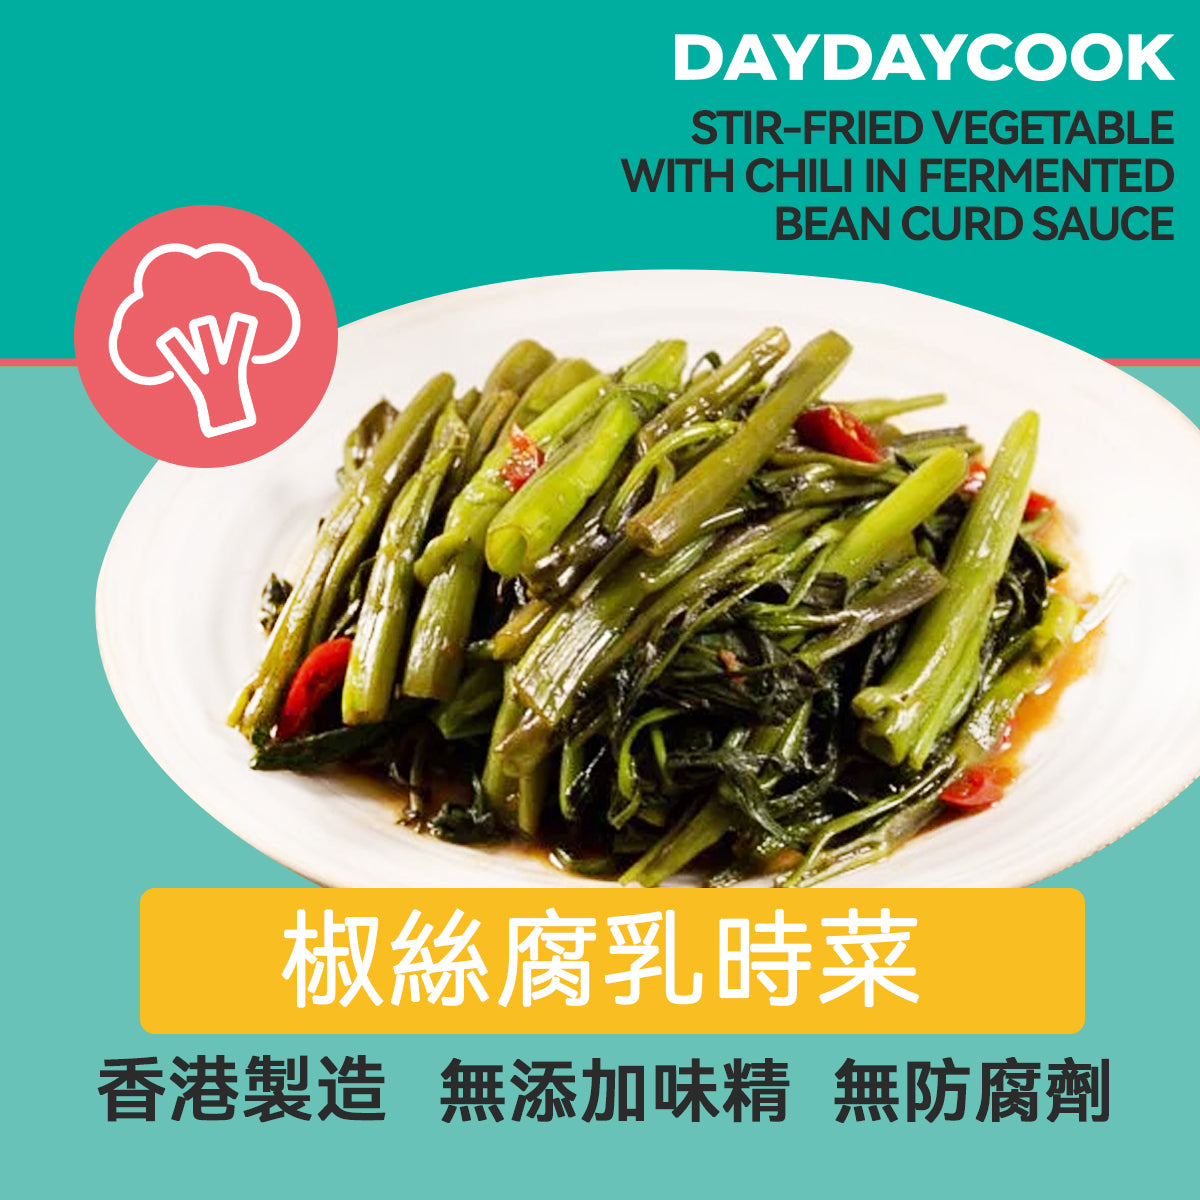 Stir-fried vegetable with Chili in Fermented Bean Curd Sauce